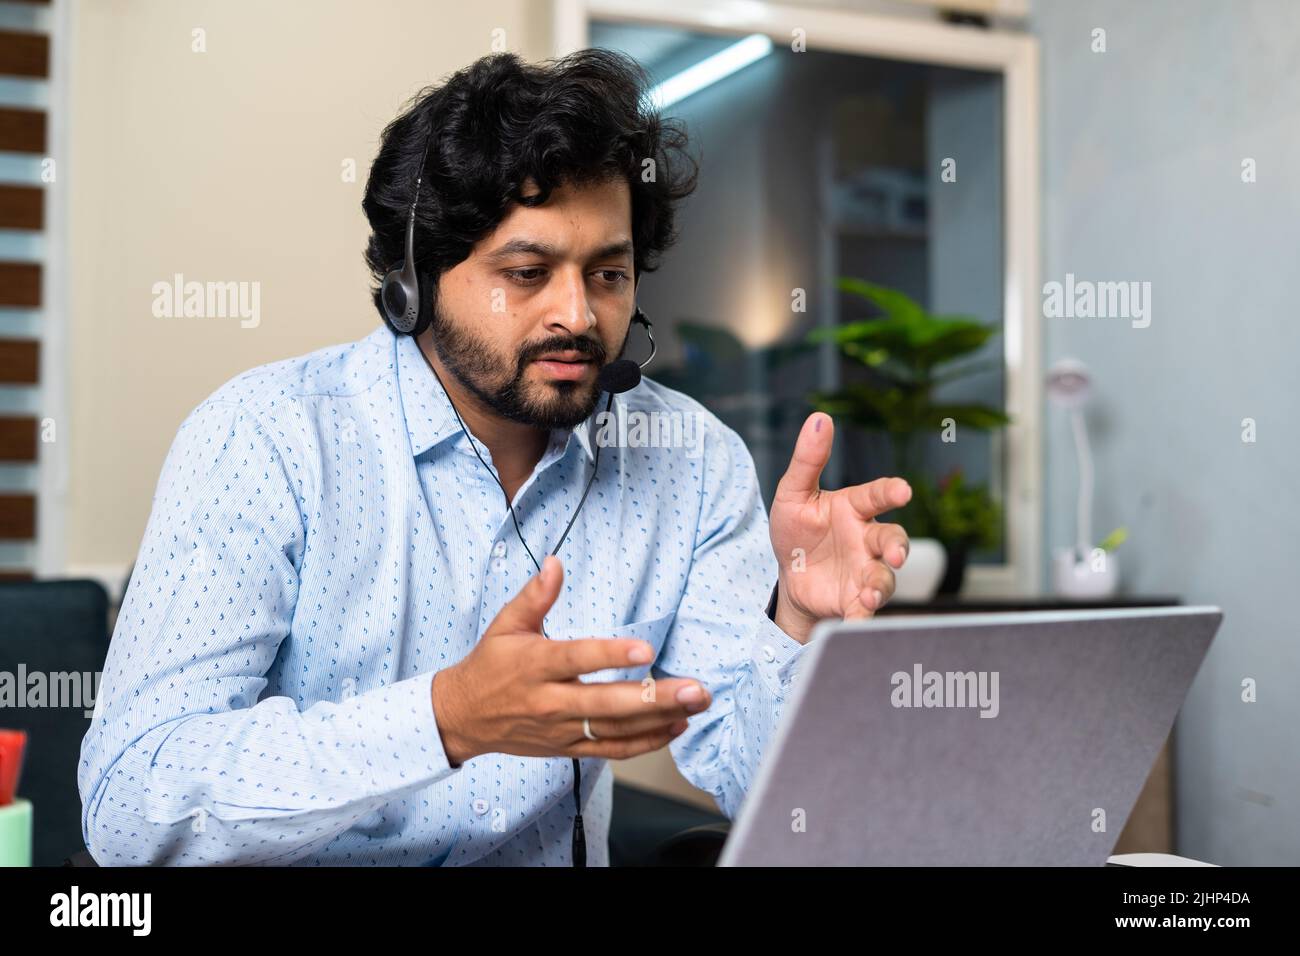 Corporate employee busy attanding meeting by advising on laptop at office - concept of customer service, client support and communication skills. Stock Photo